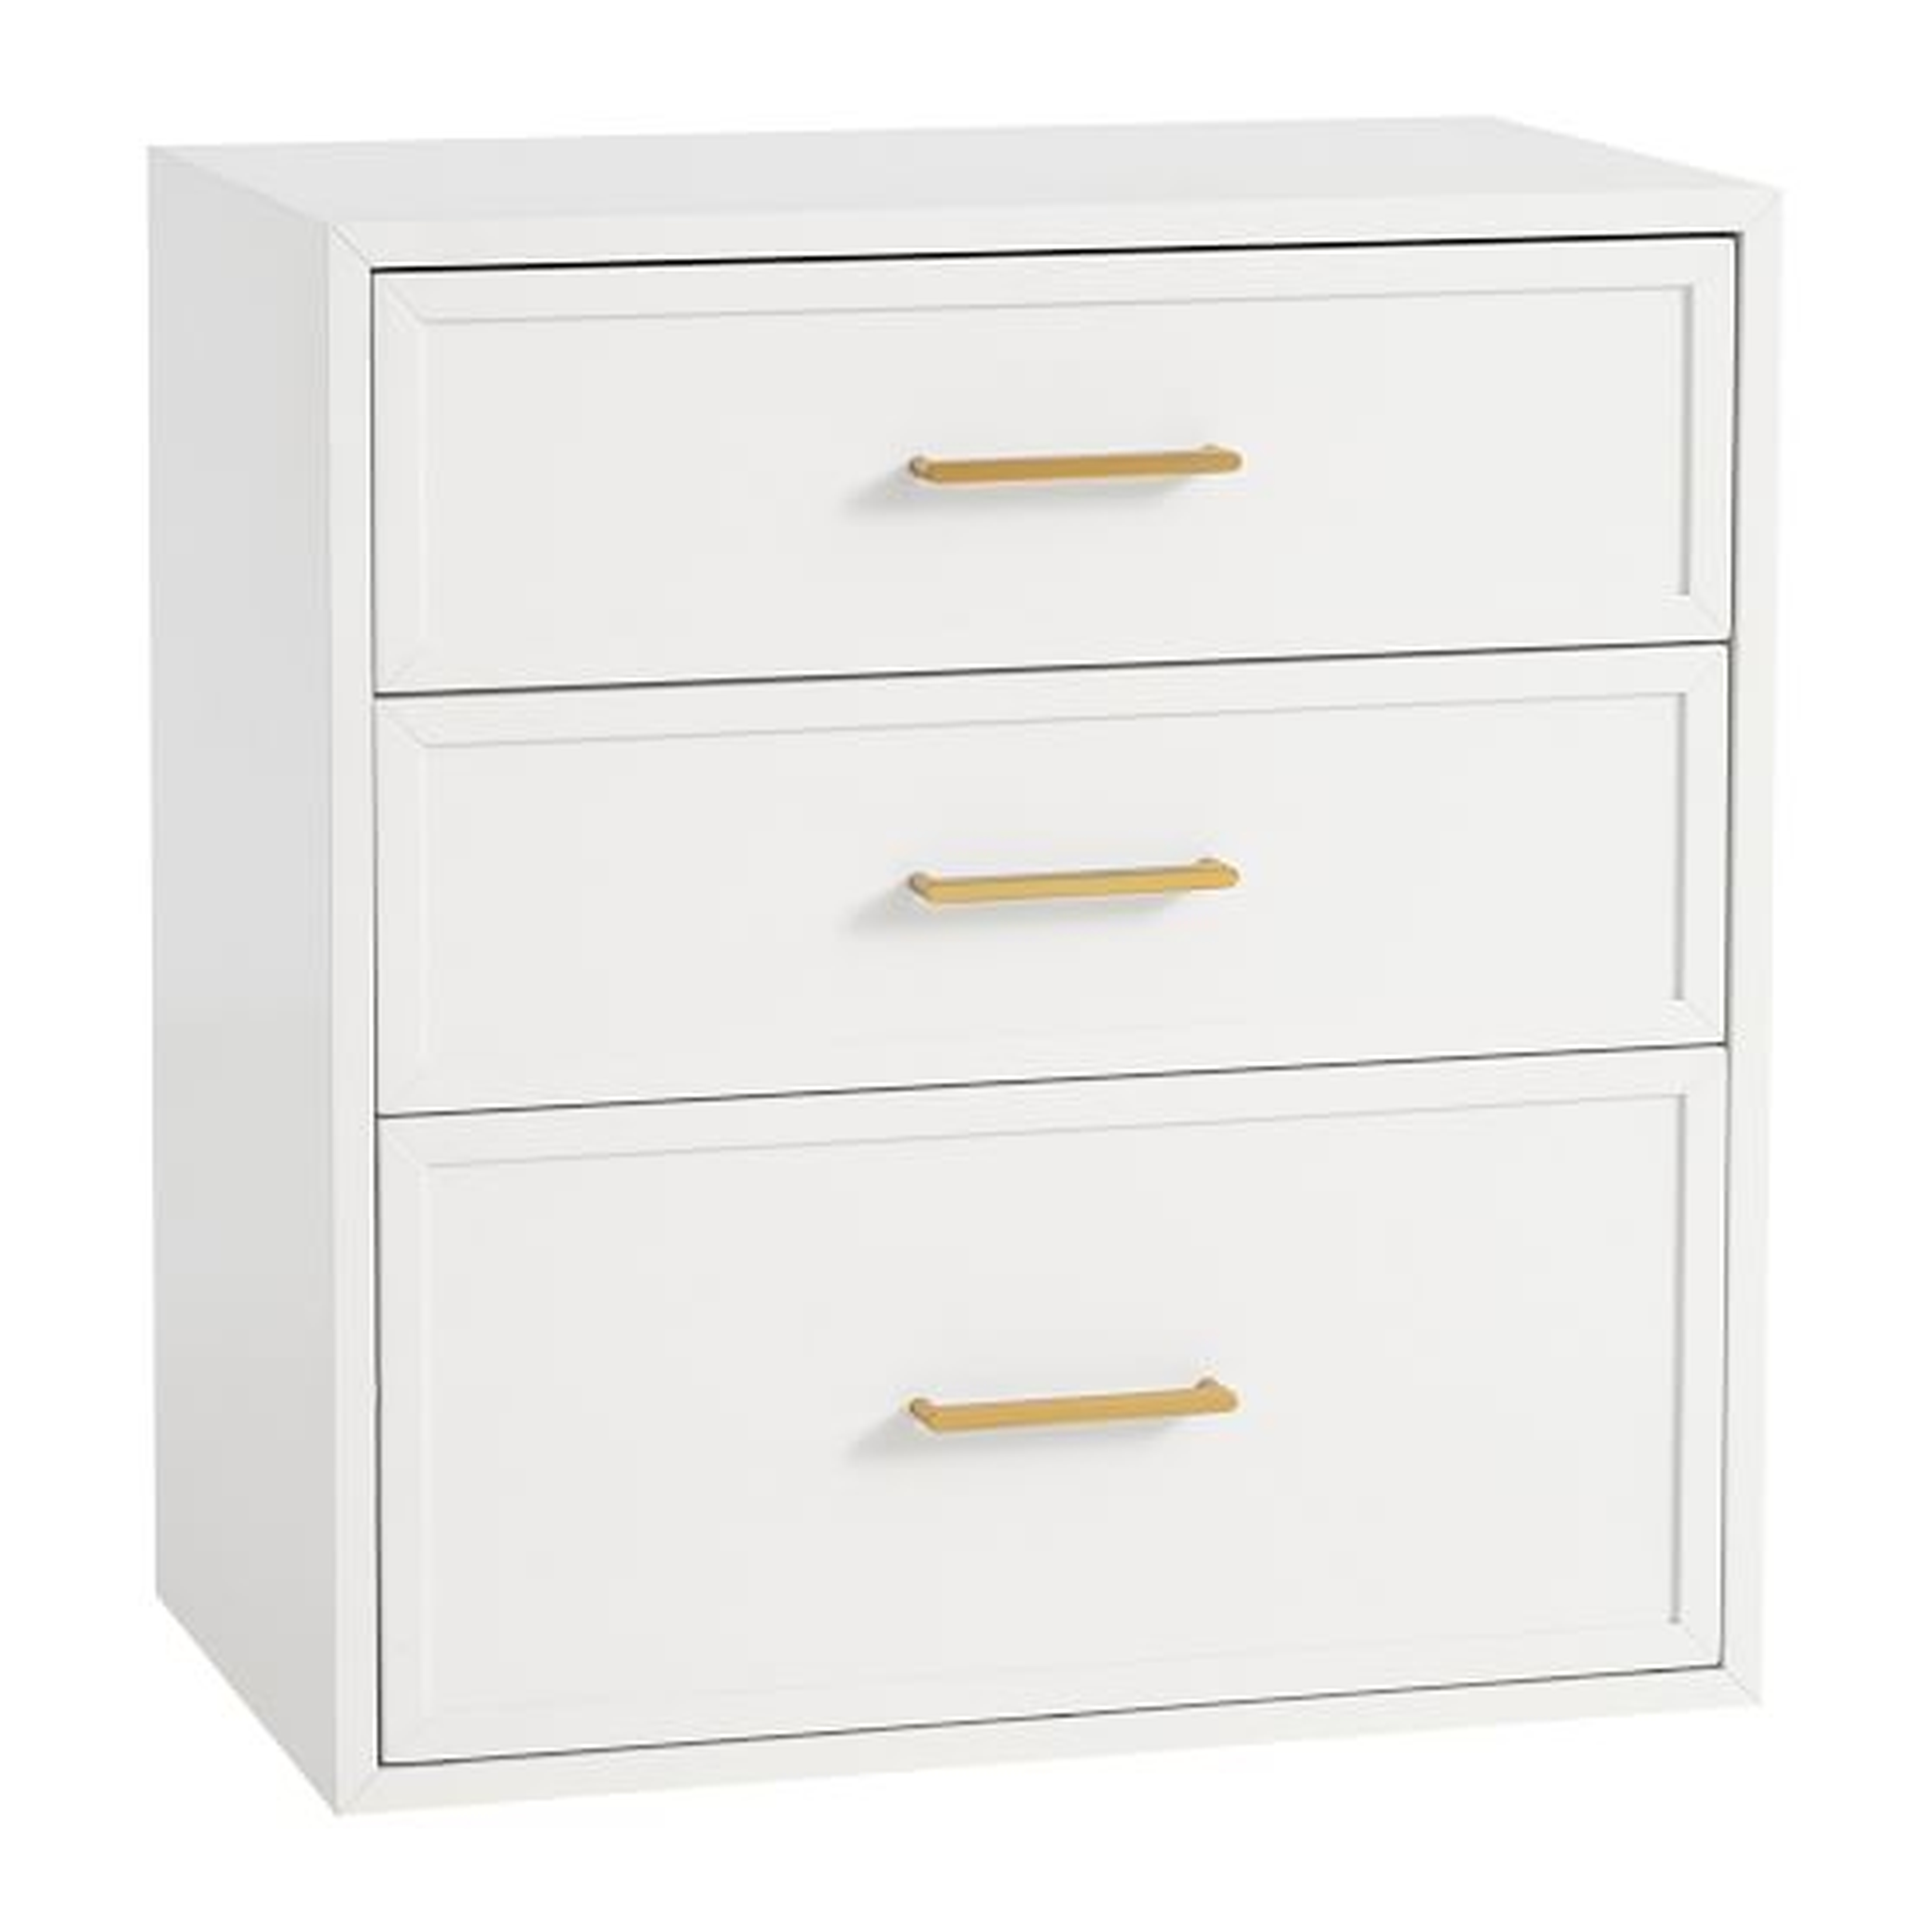 Blaire 3-Drawer Storage Cabinet, Simply White - Pottery Barn Teen